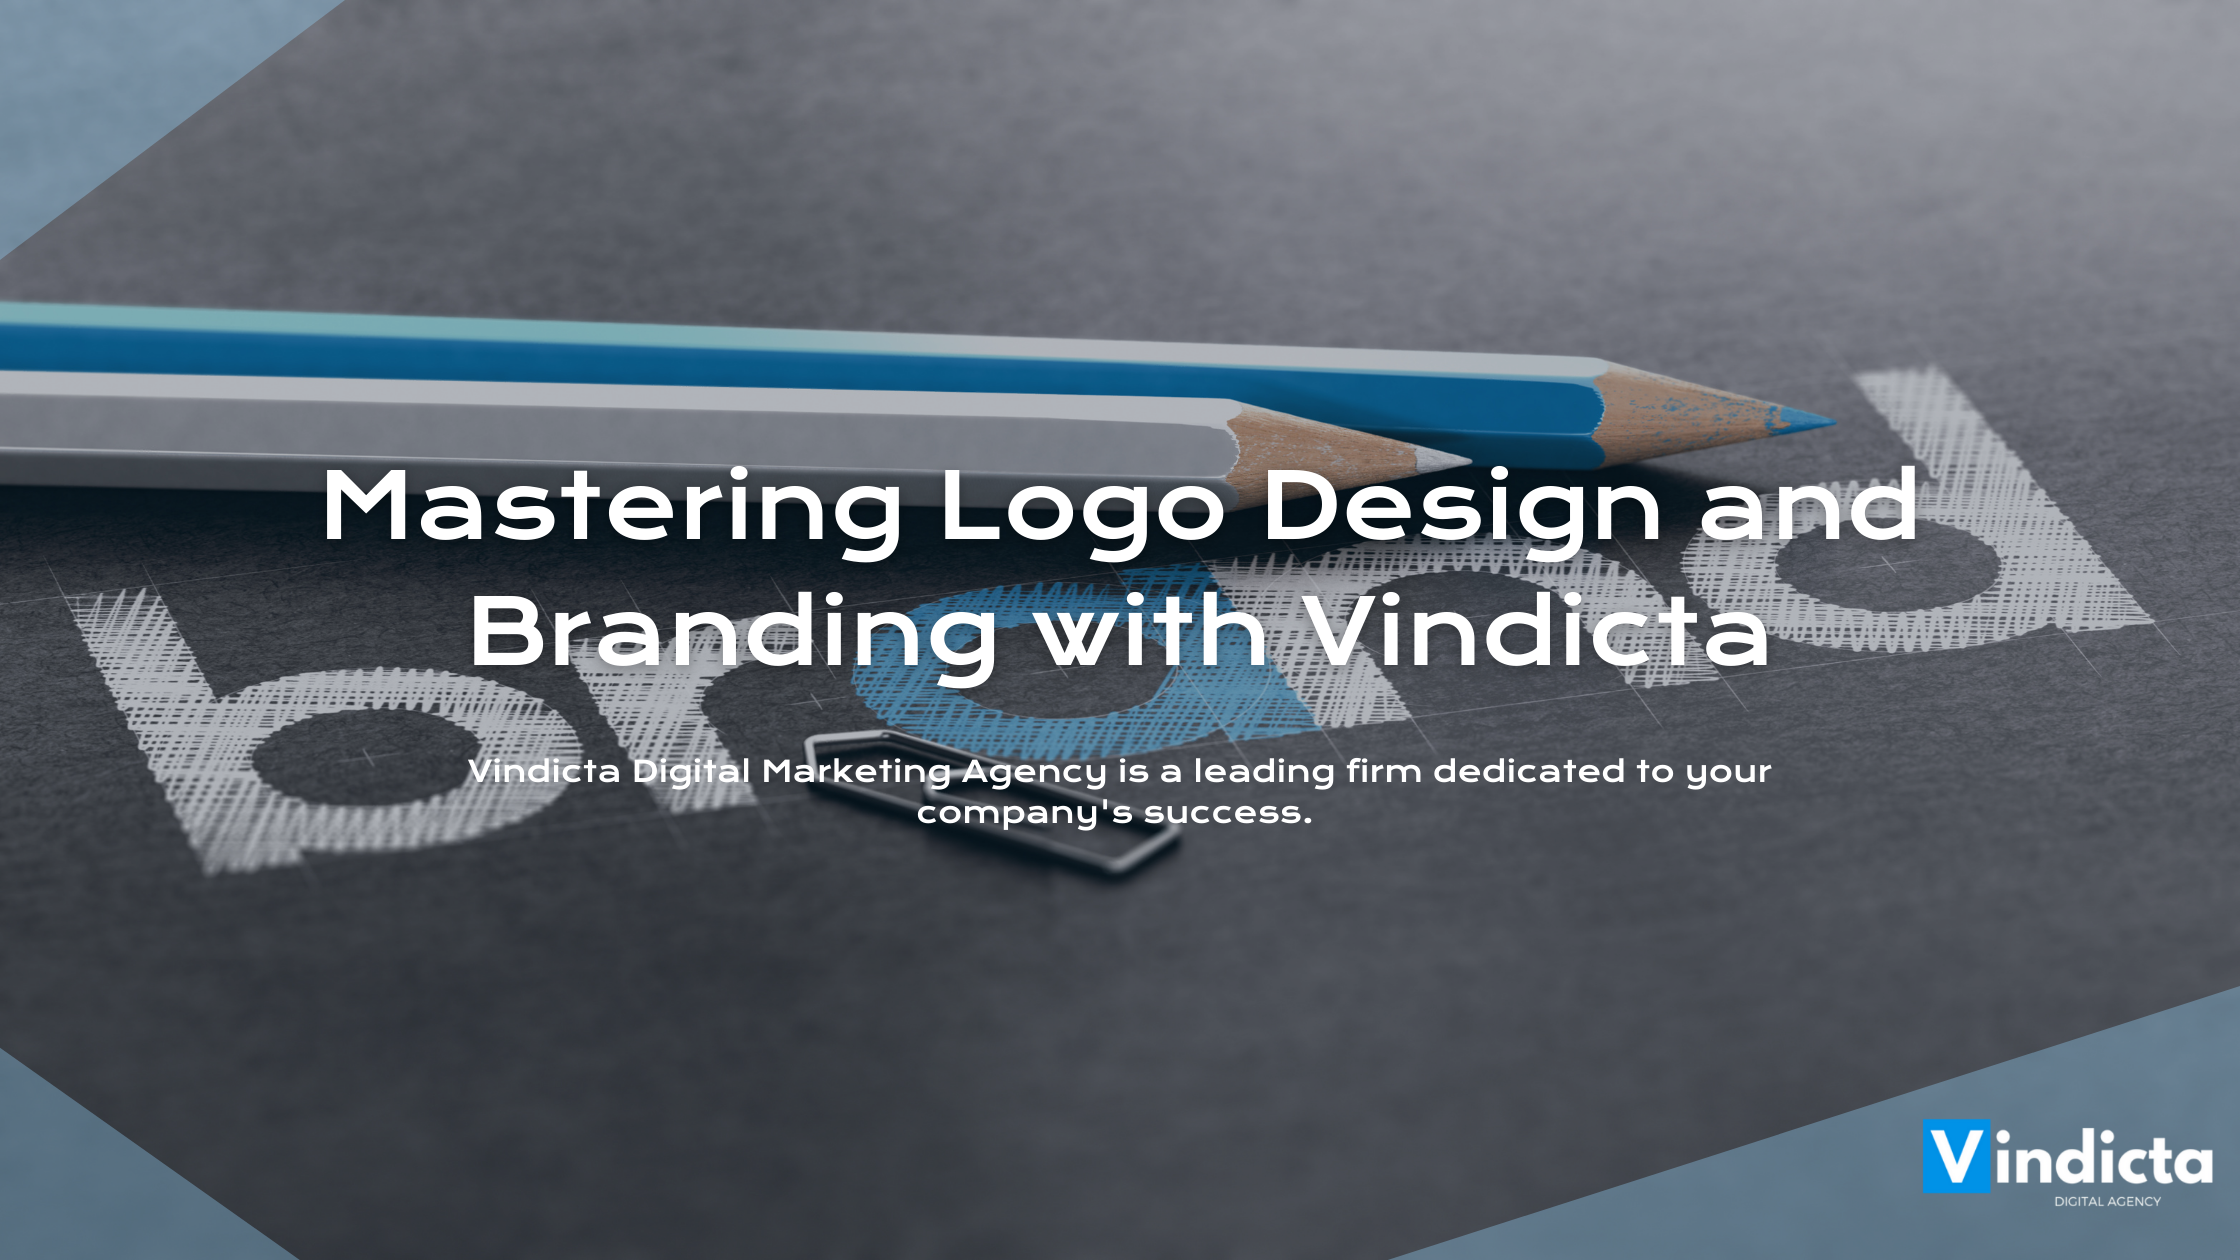 Mastering Logo Design and Branding with Vindicta